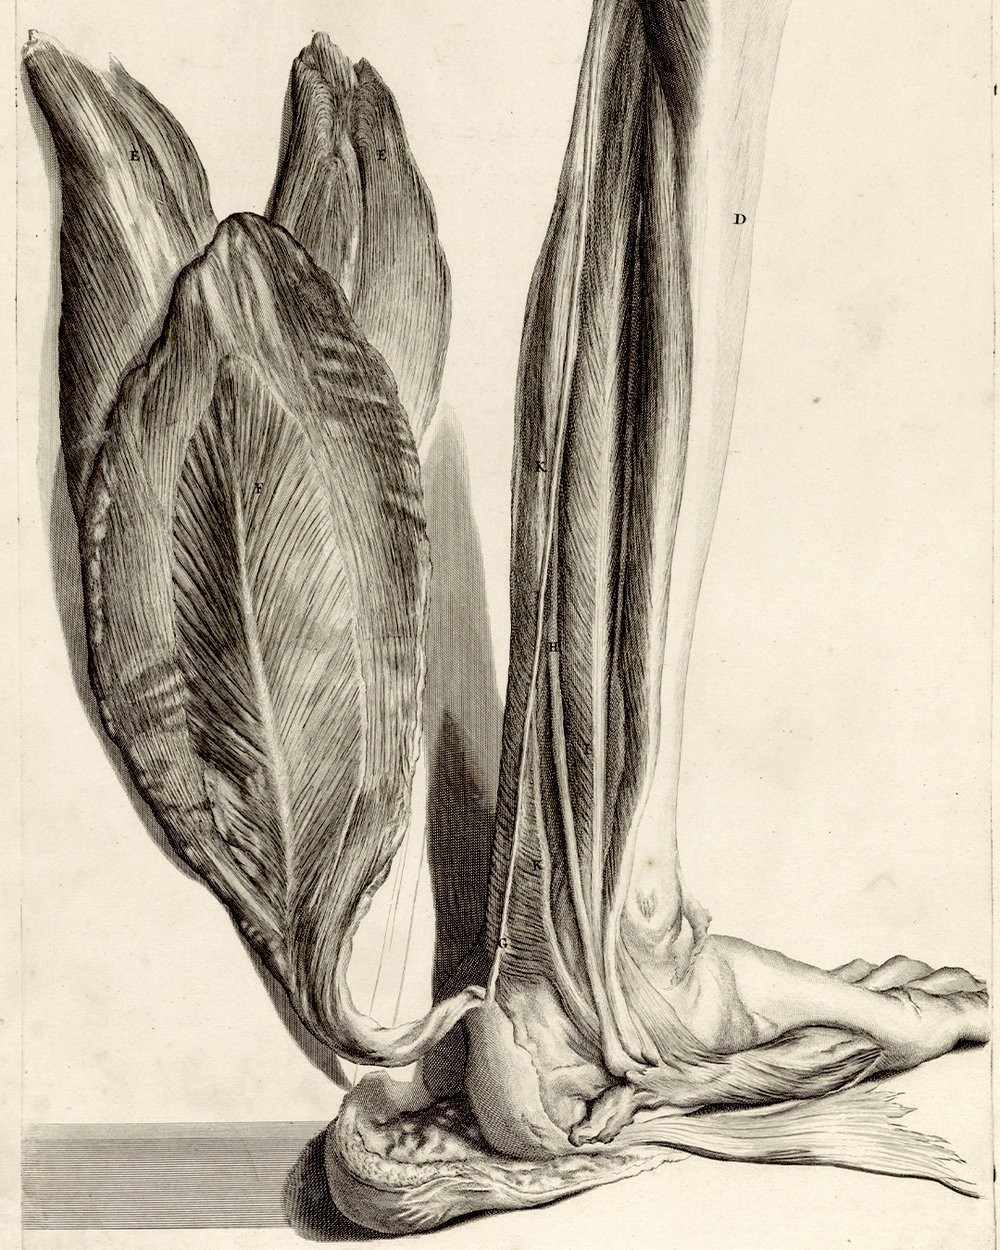 ''Anatomical study of the back of the left foot'' (1685)